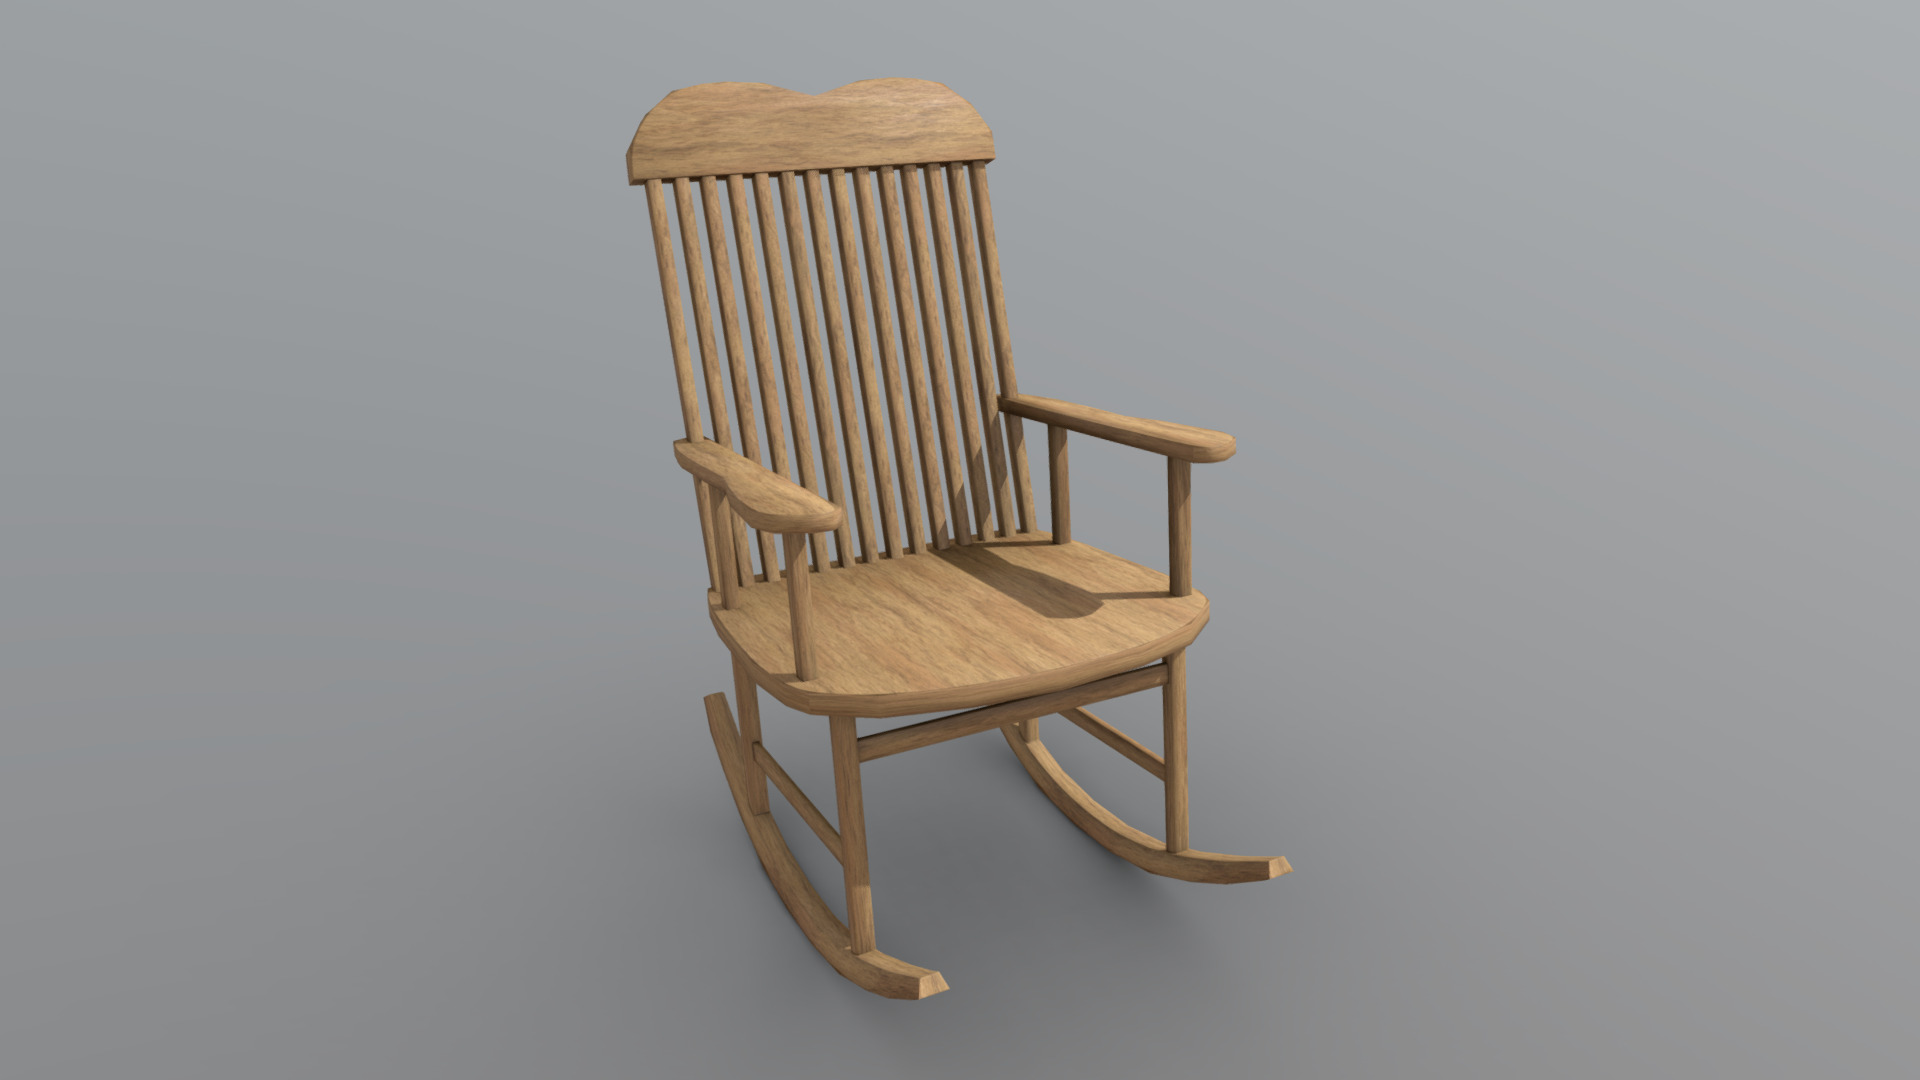 3D model Rocking Chair - This is a 3D model of the Rocking Chair. The 3D model is about a wooden chair with a cushion.